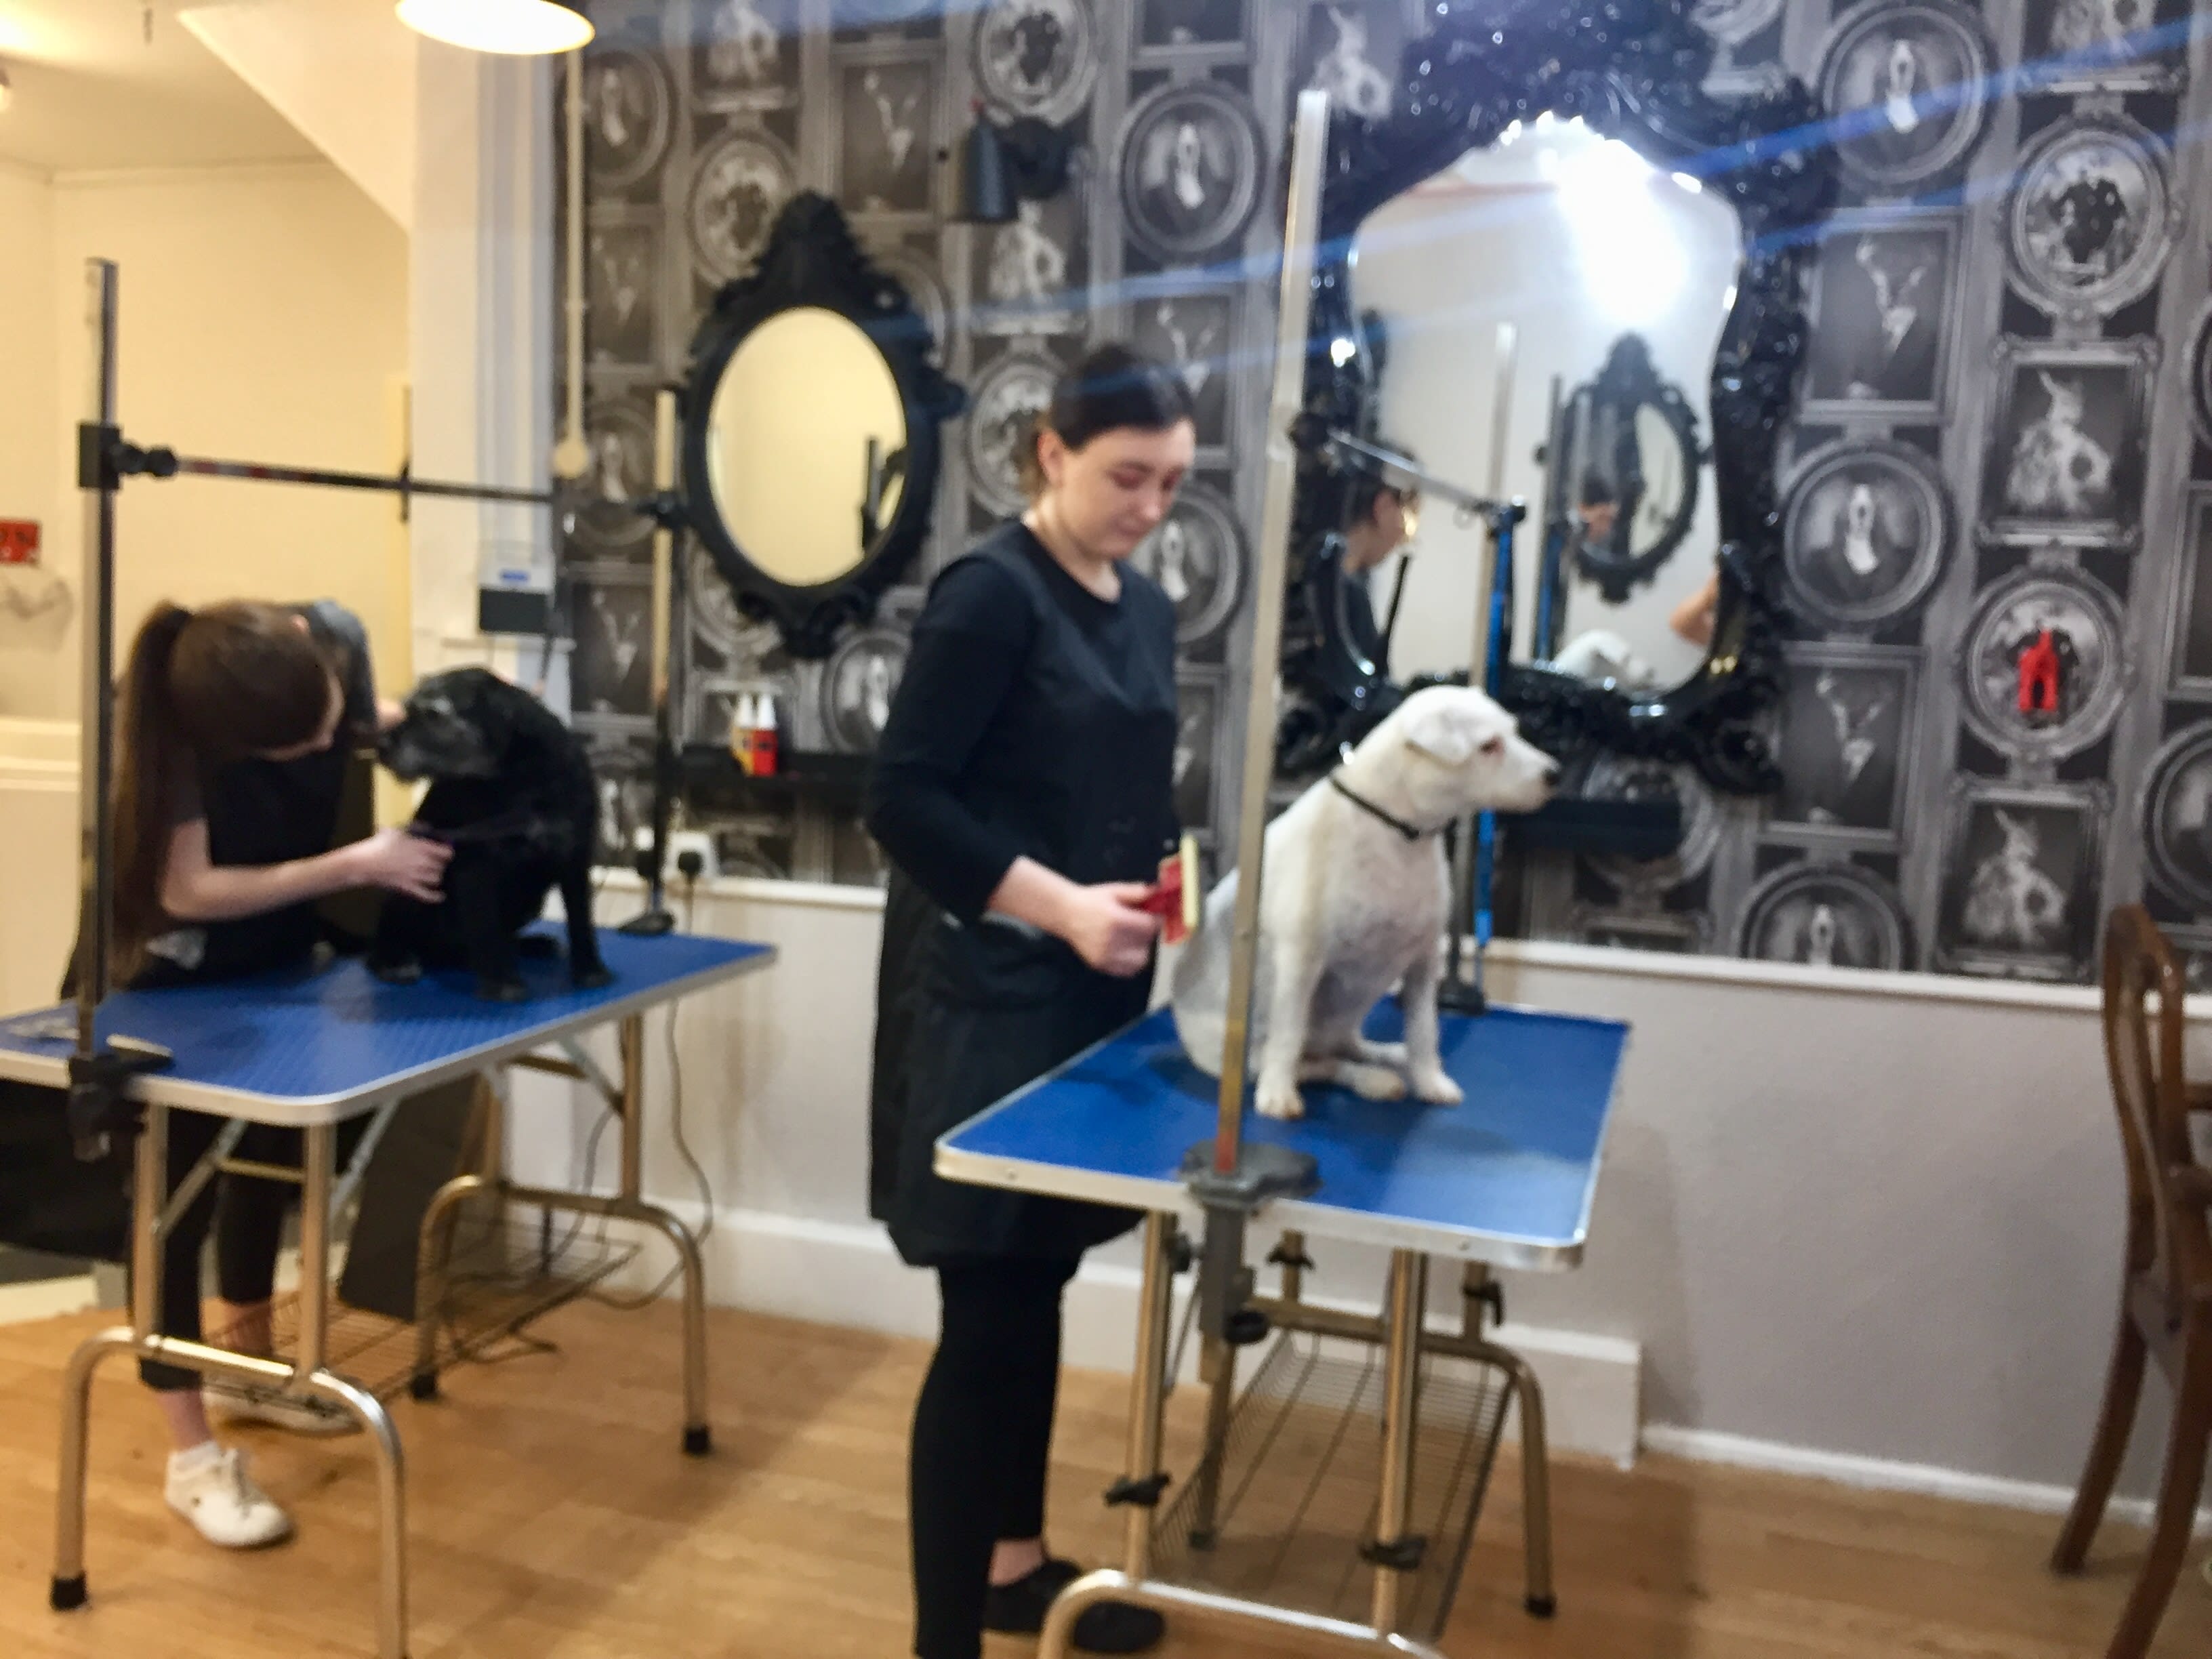 Dog Grooming Course Dog Grooming Training Course The